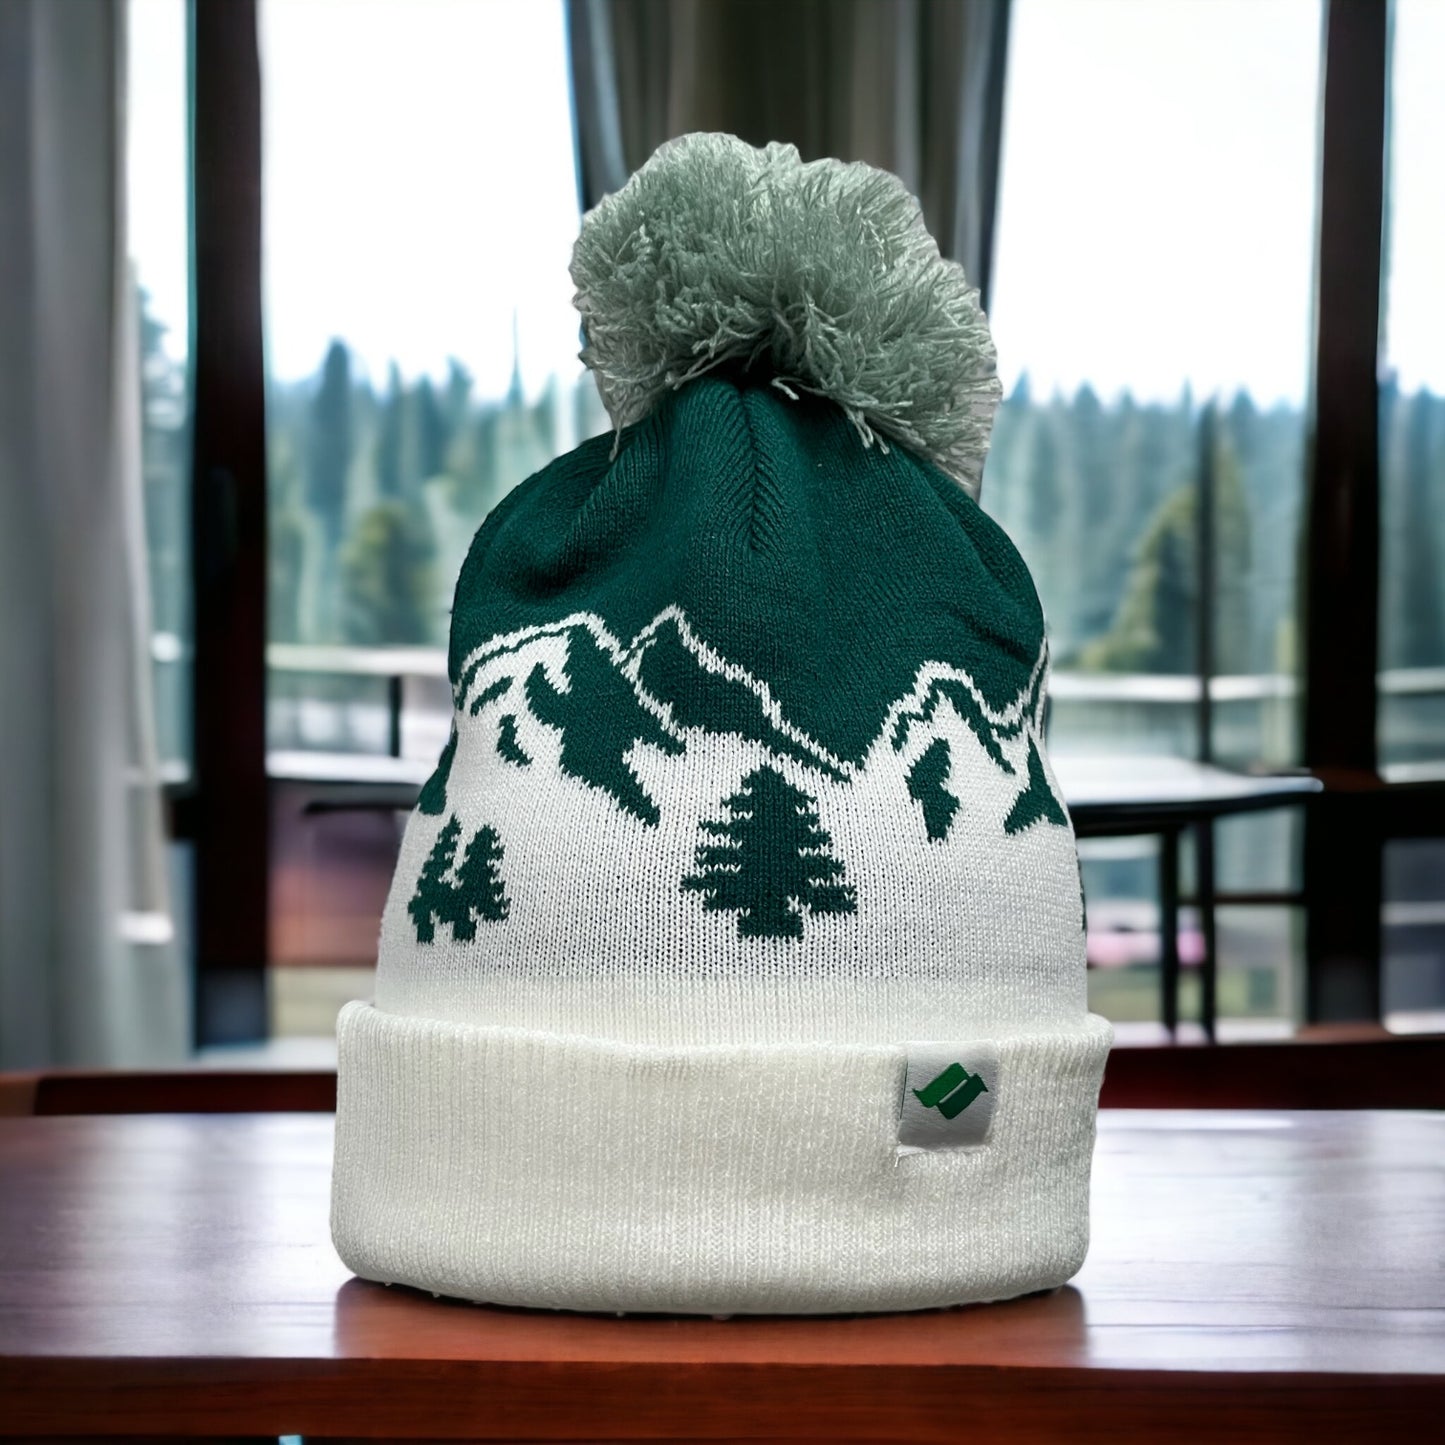 Green and White with mountain scape. Snow Summit tag on the left corner.